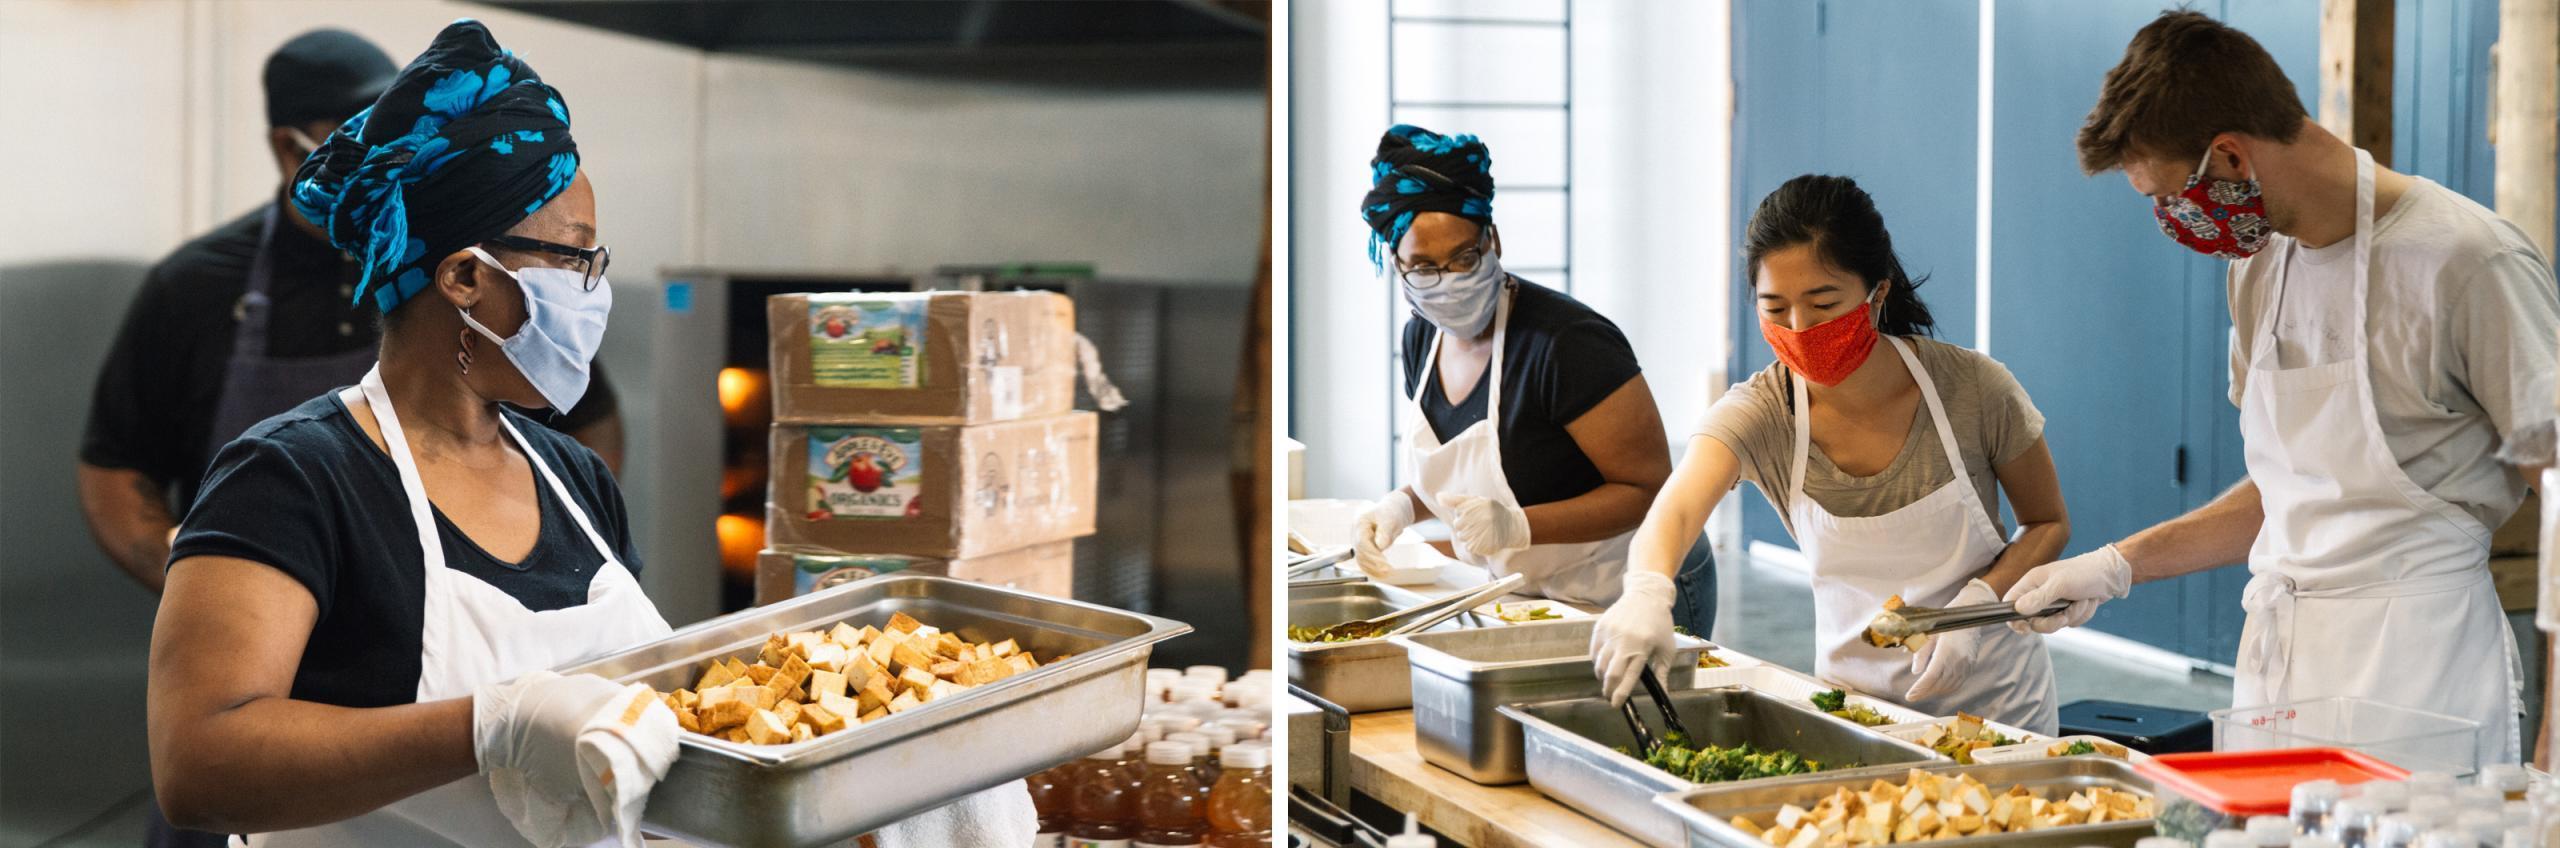 An image of two photos: The left photo shows a woman carrying a stainless steel tray with cubes of tofu; the right photo shows three people in an assembly line placing cooked vegetables and noodles into take-out containers.